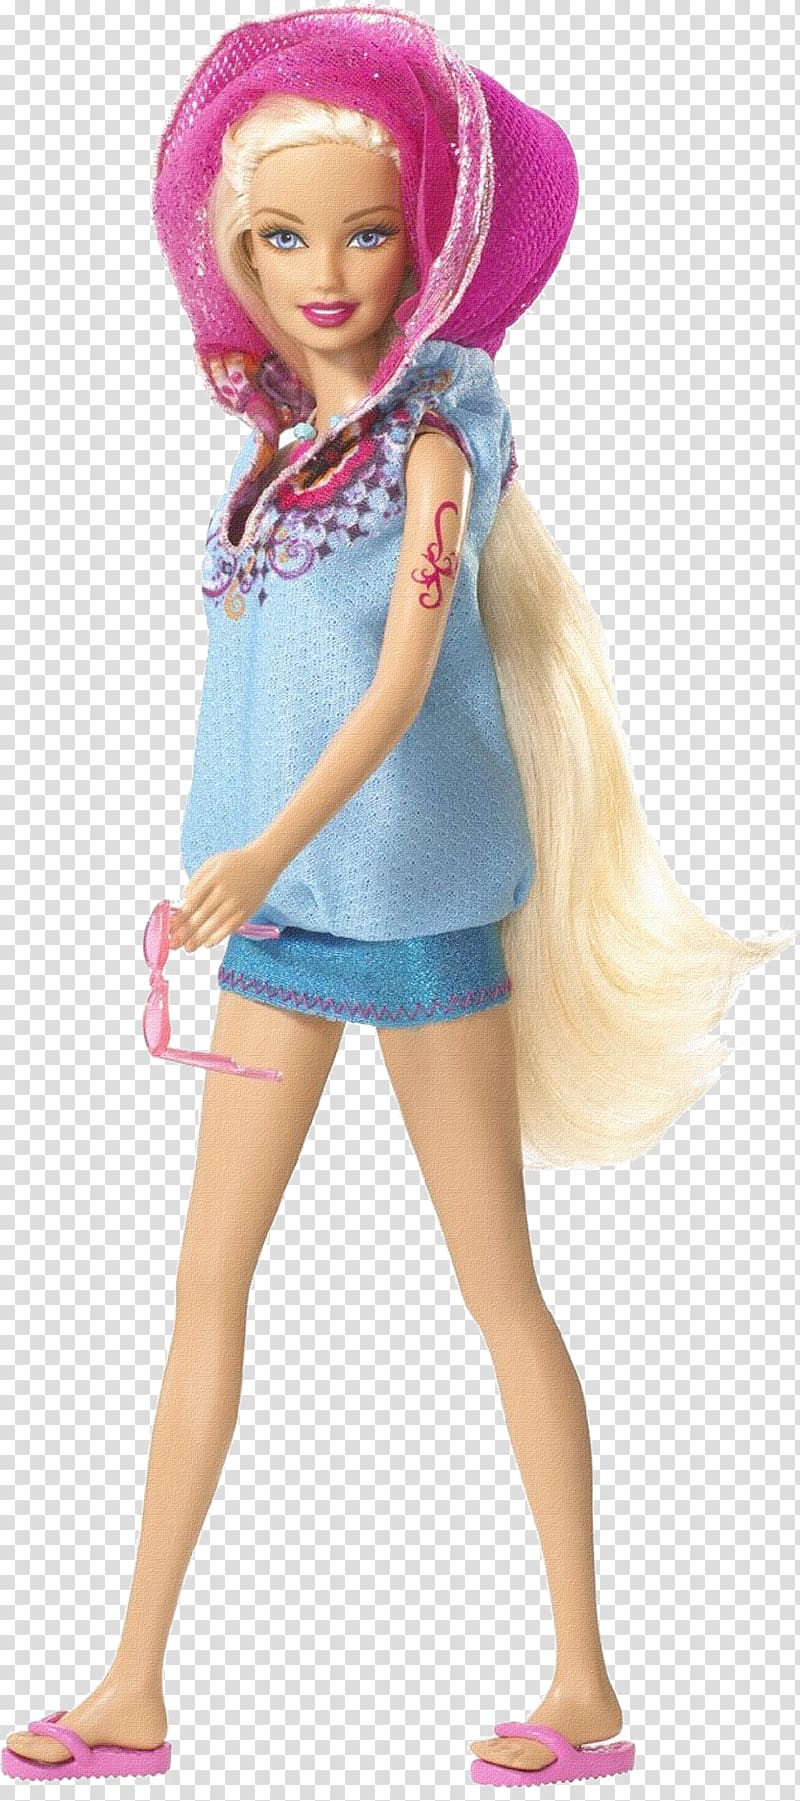 Merliah Summers Barbie in A Mermaid Tale Amazon.com Pufferazzi, barbie doll transparent background PNG clipart